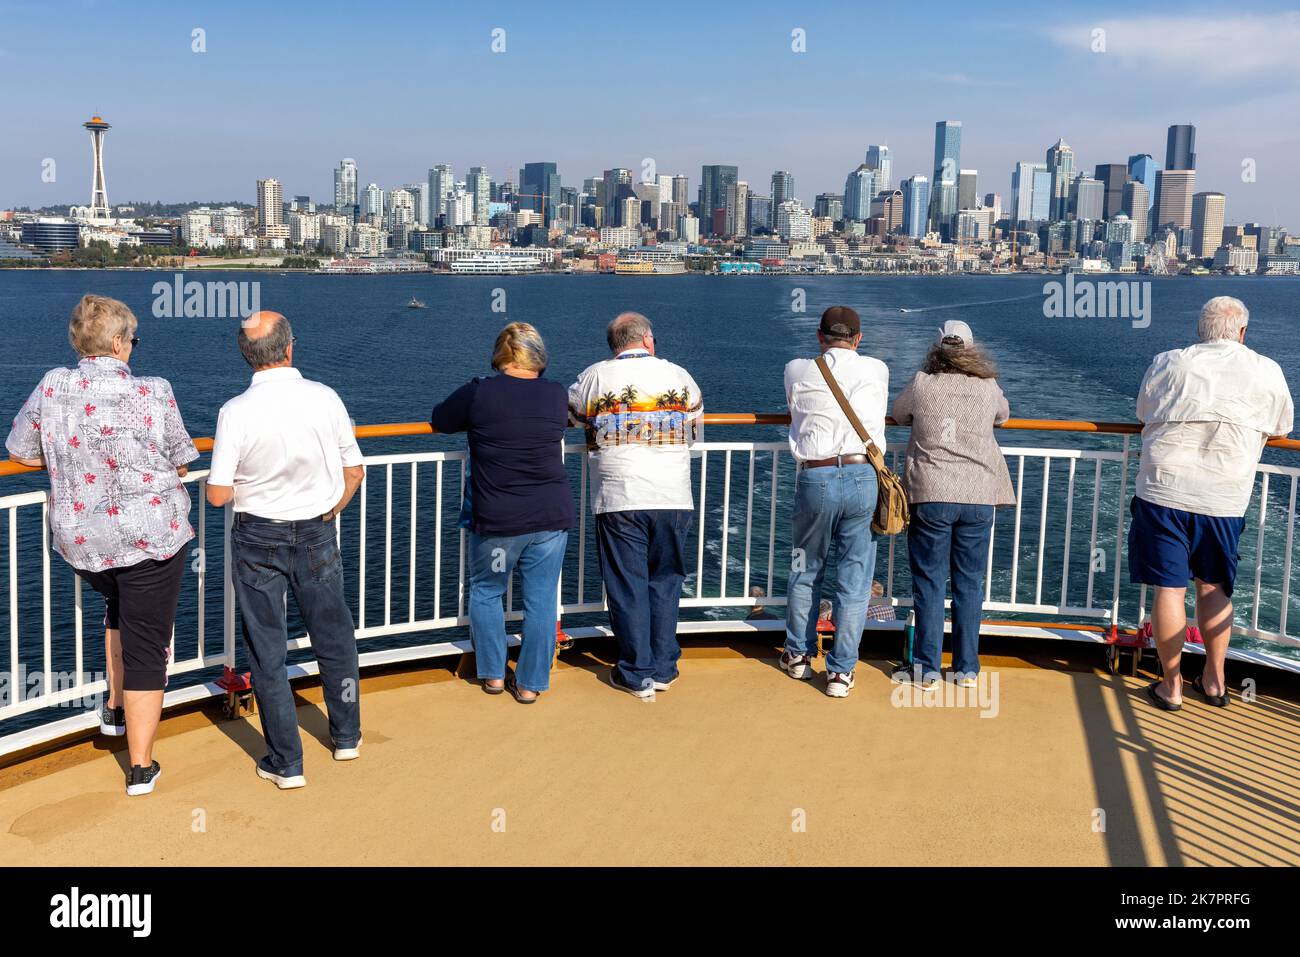 Tourists on a cruise ship looking out at downtown Seattle skyline - Seattle, Washington, USA Stock Photo